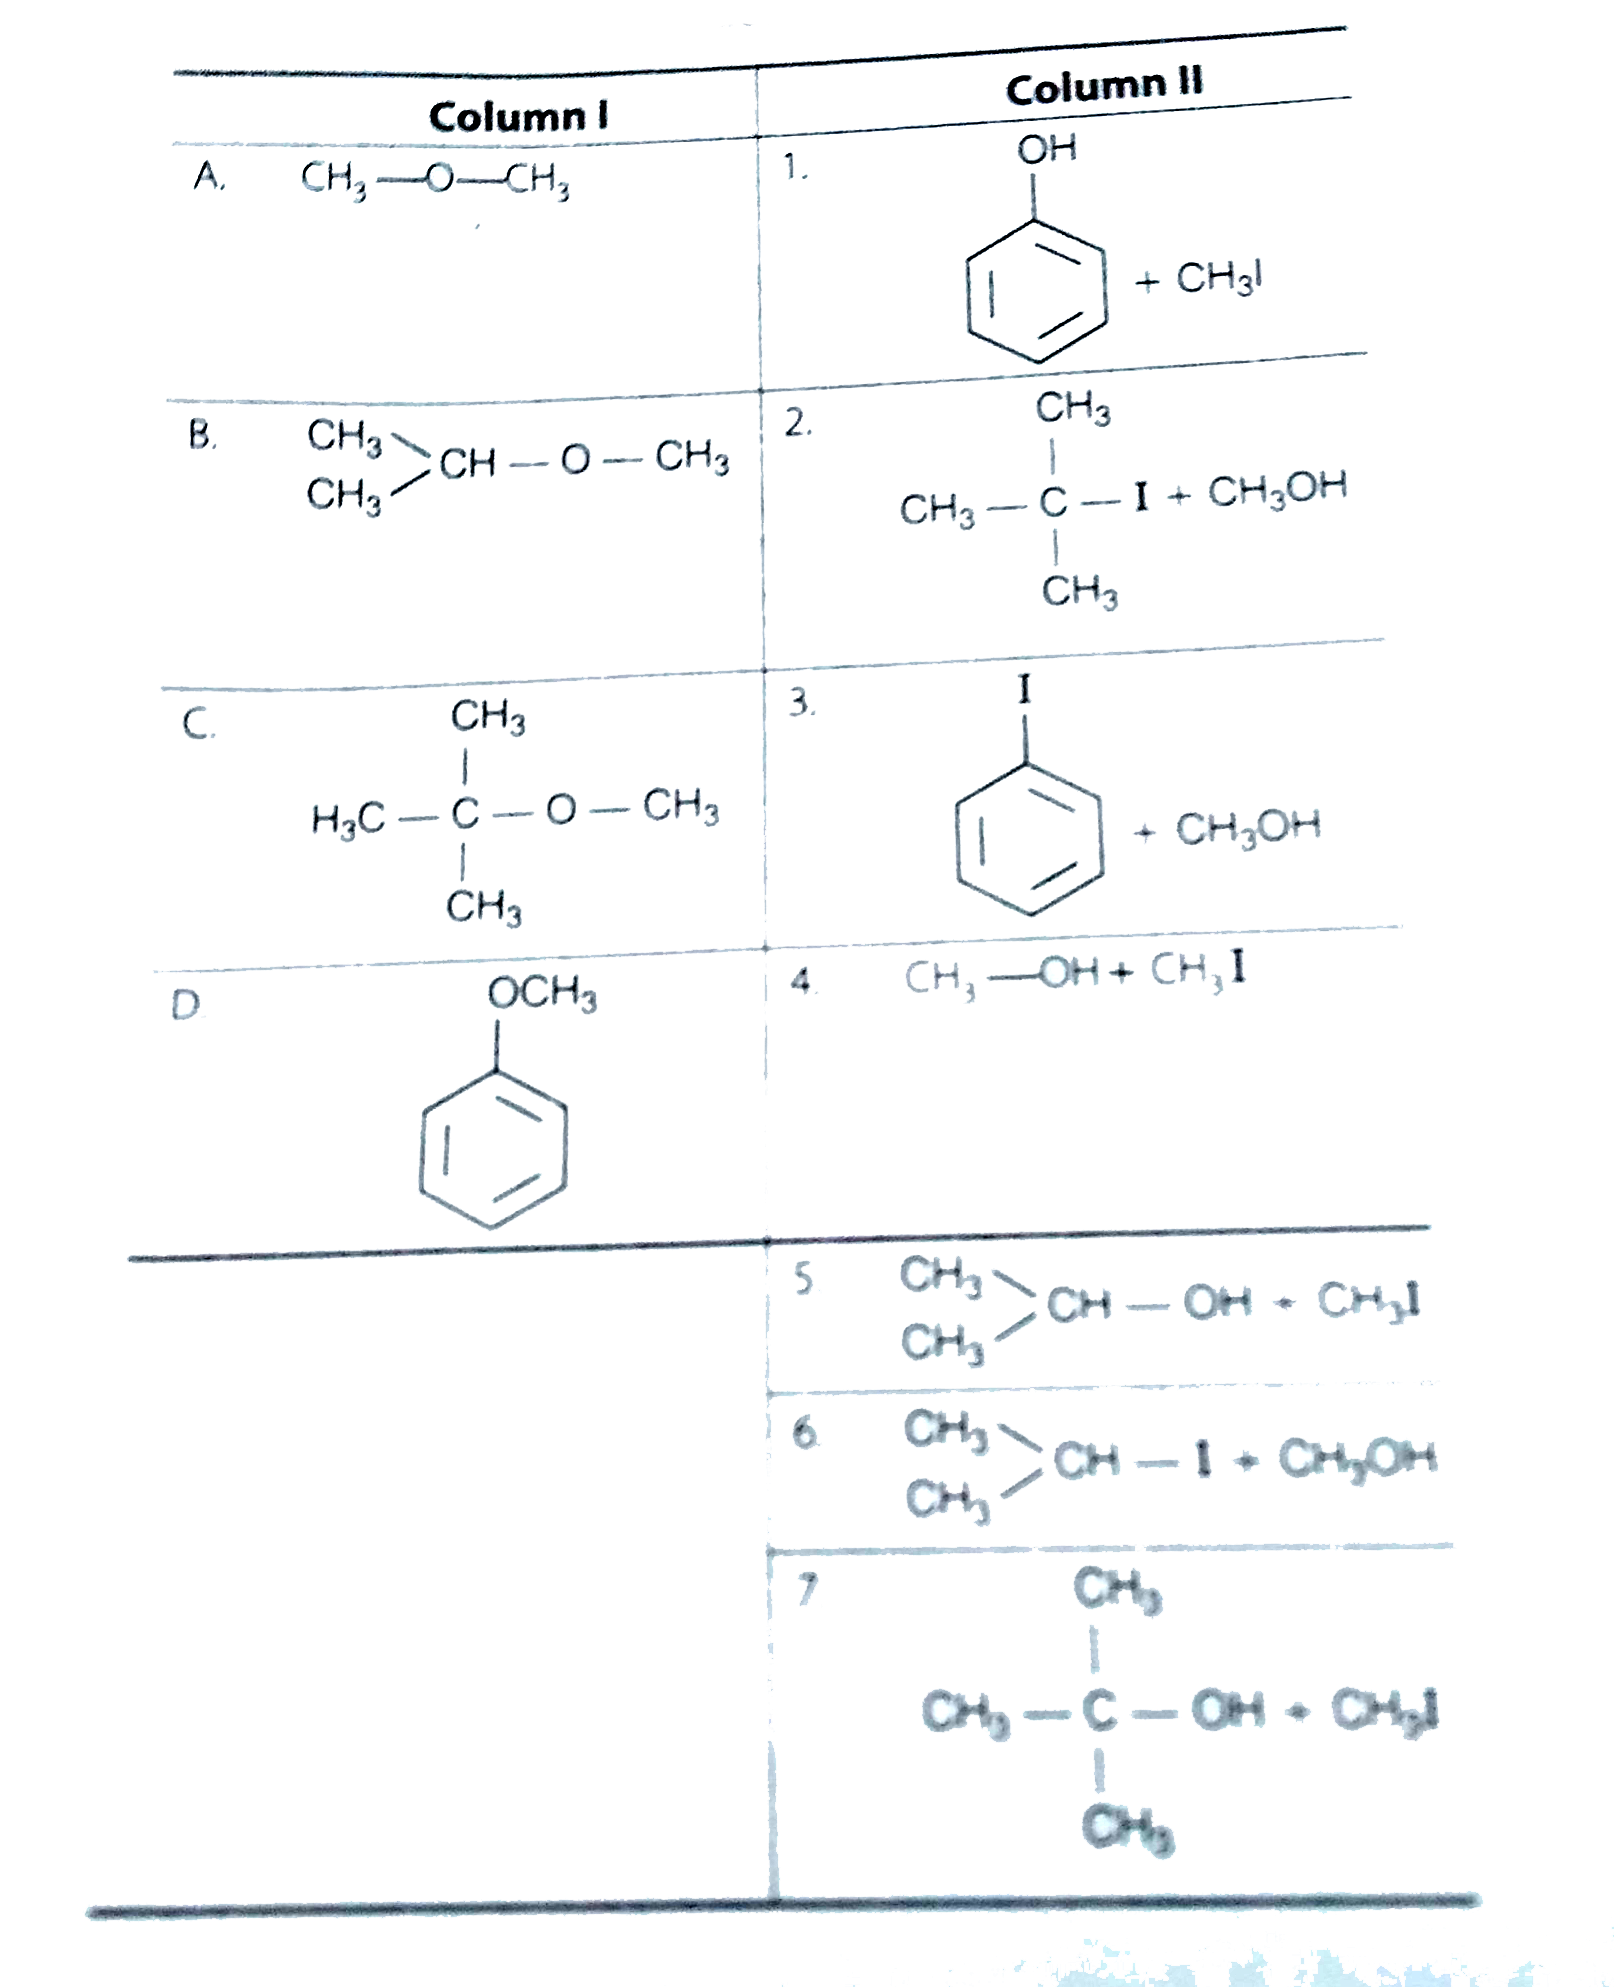 Match the starting material given in Column I with the products formed by these (Column II) in the reaction with HI.